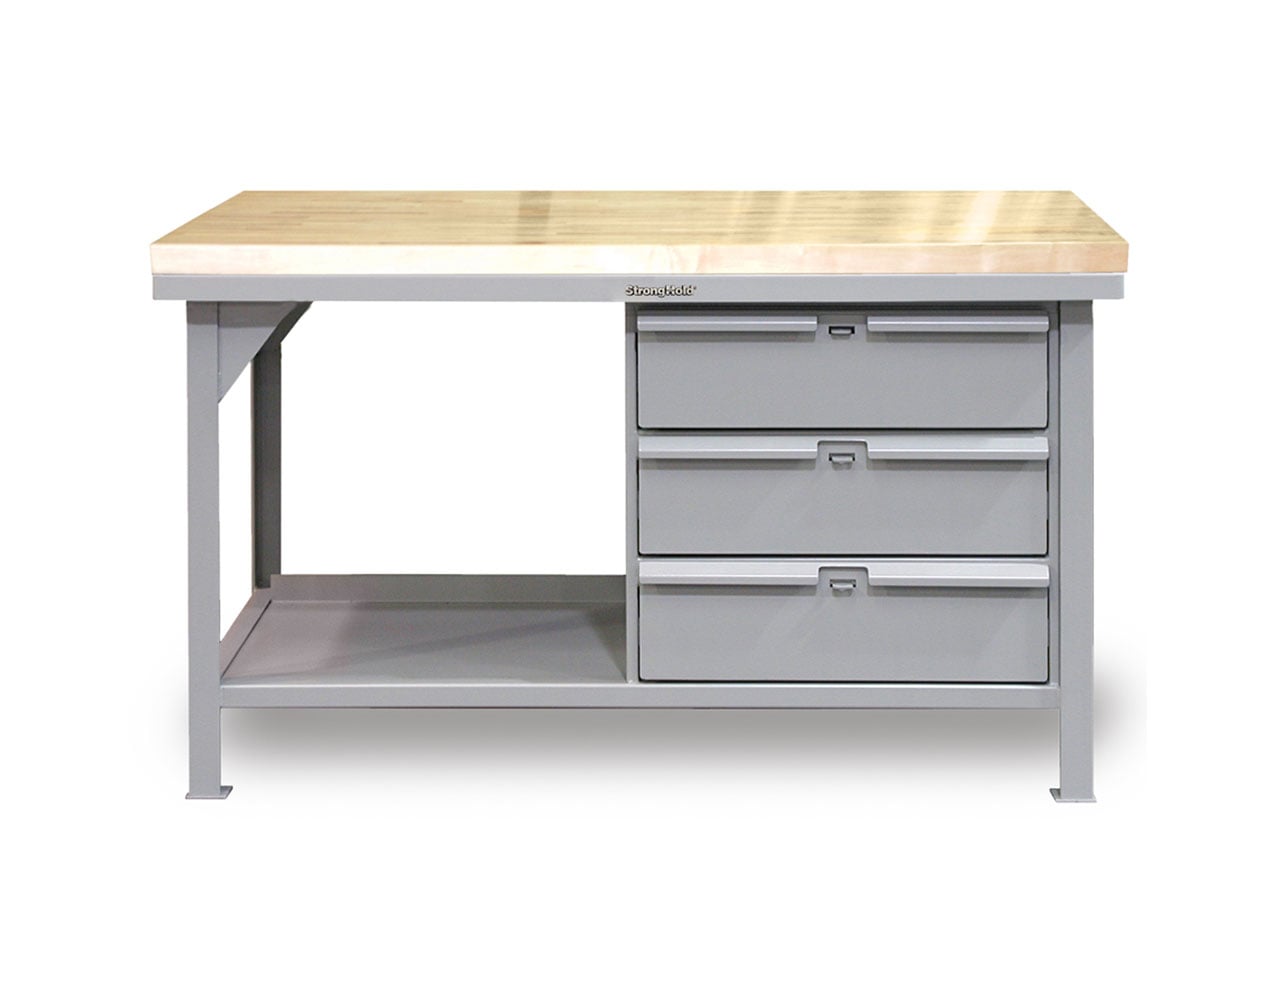 Extreme Duty 7 GA Shop Table with UHMW Top, 3 Drawers, 1 Shelf - 60 In. W x 36 In. D x 34 In. H